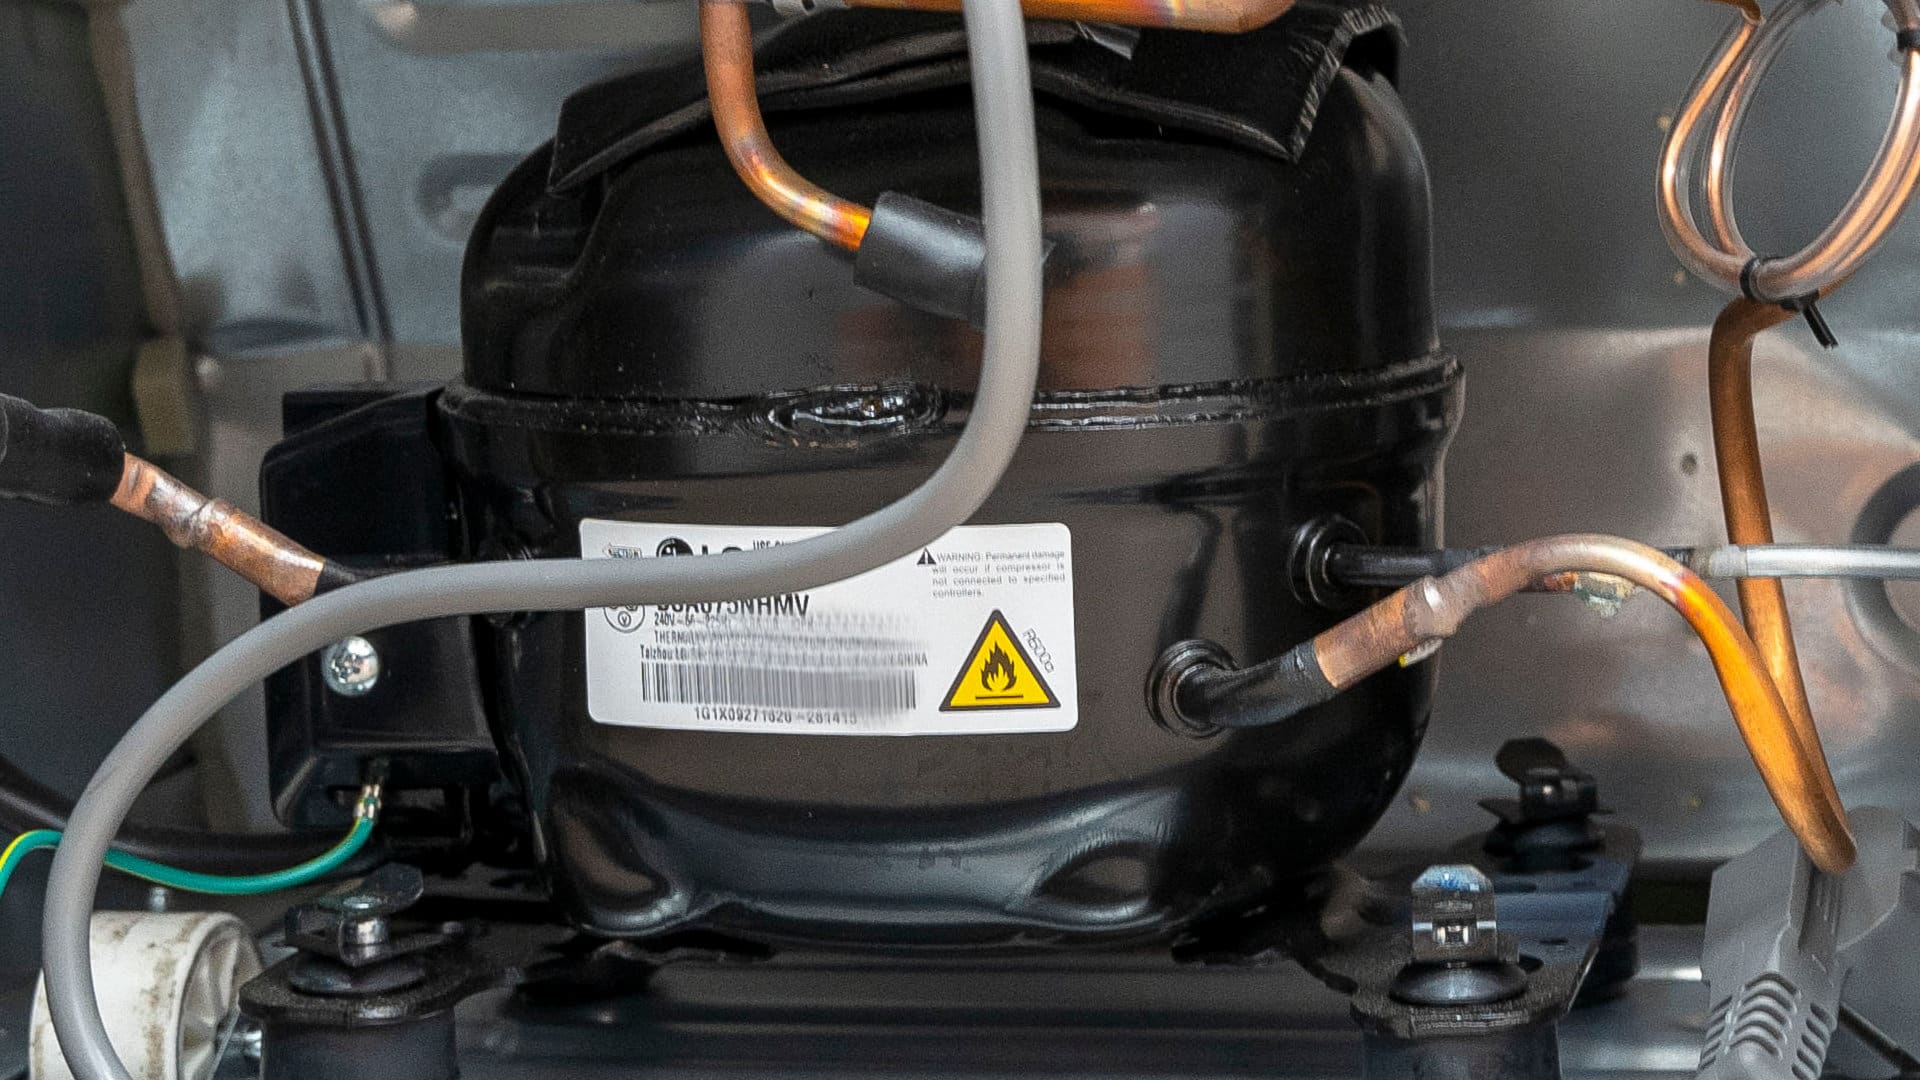 Featured image for “Refrigerator Compressor Too Hot? Here’s What To Do”